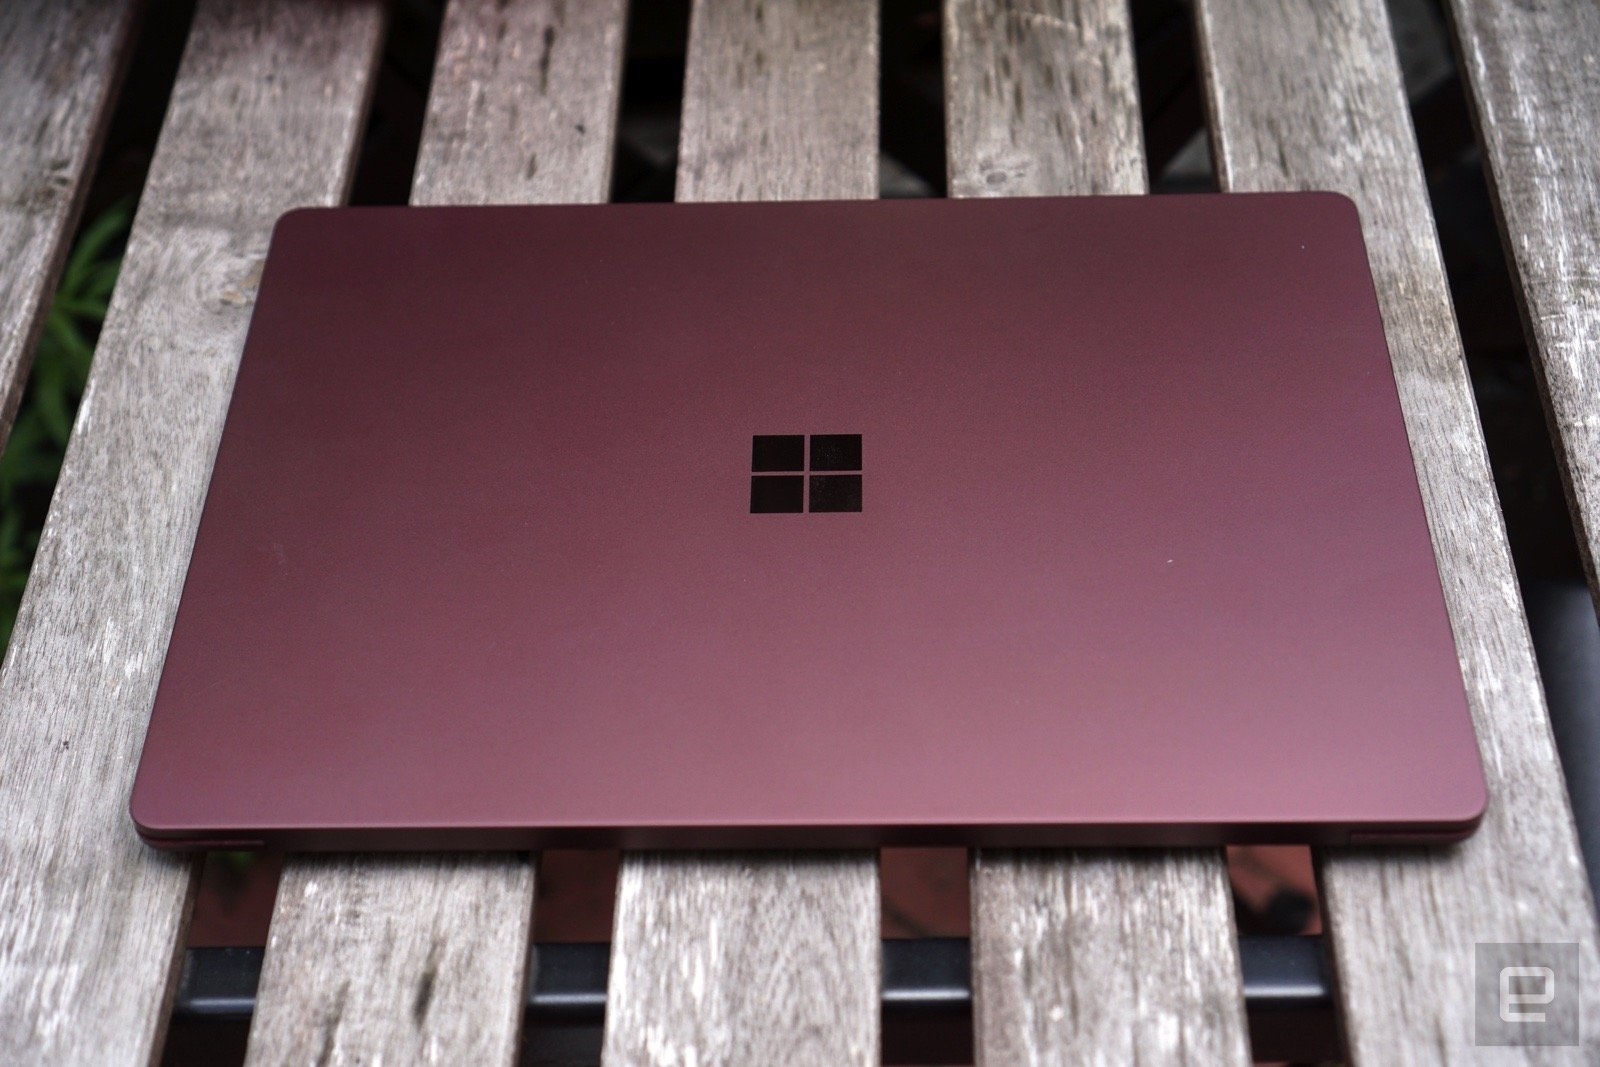 The Surface Laptop is the pinnacle of design | DeviceDaily.com